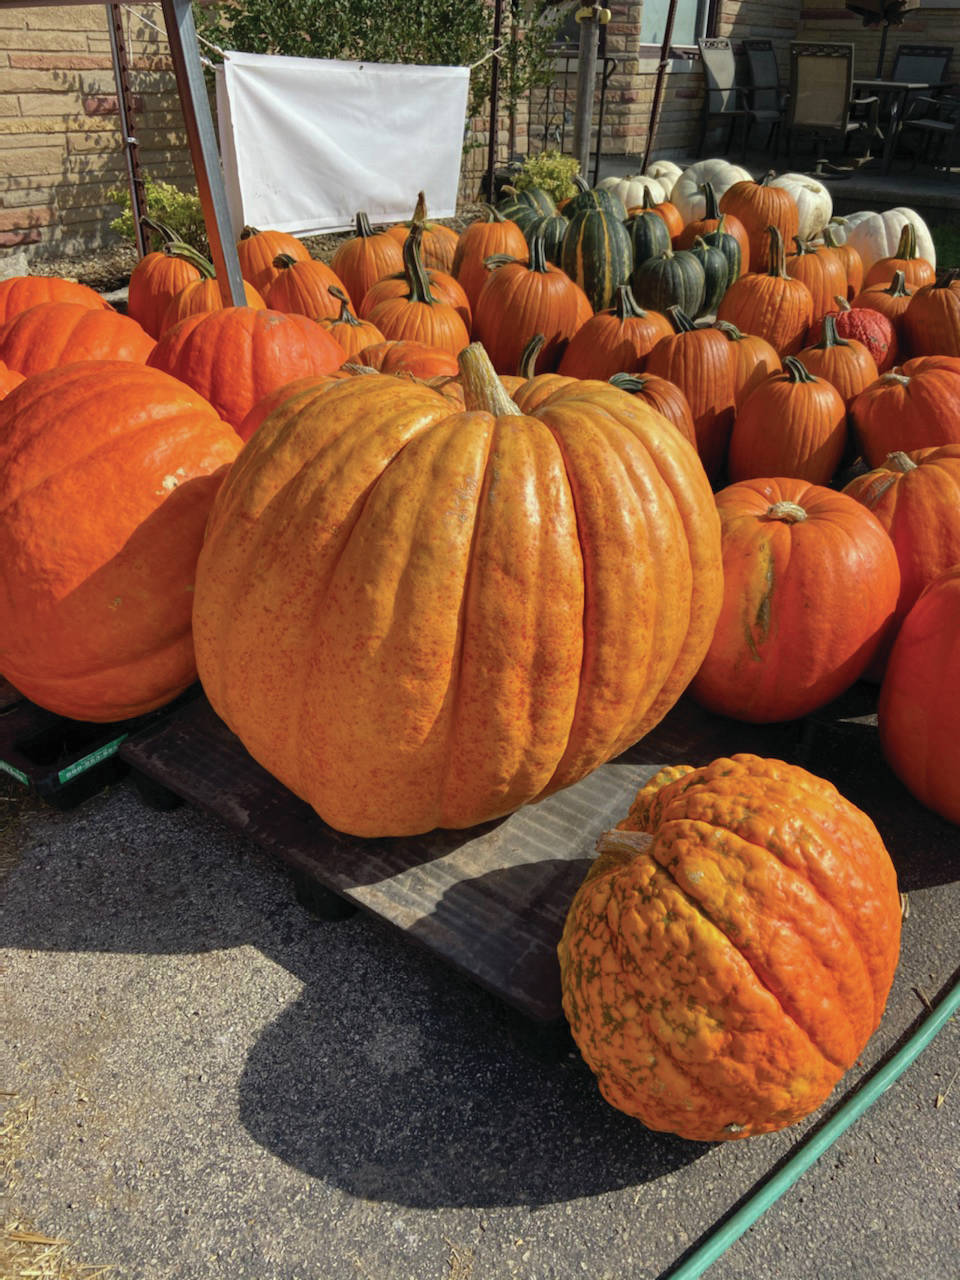 Pumpkins and gourds can be seen all over Wisconsin at roadside stands, as seen here in this photo taken on Oct. 14, 2019. (Photo by Teri Robl)